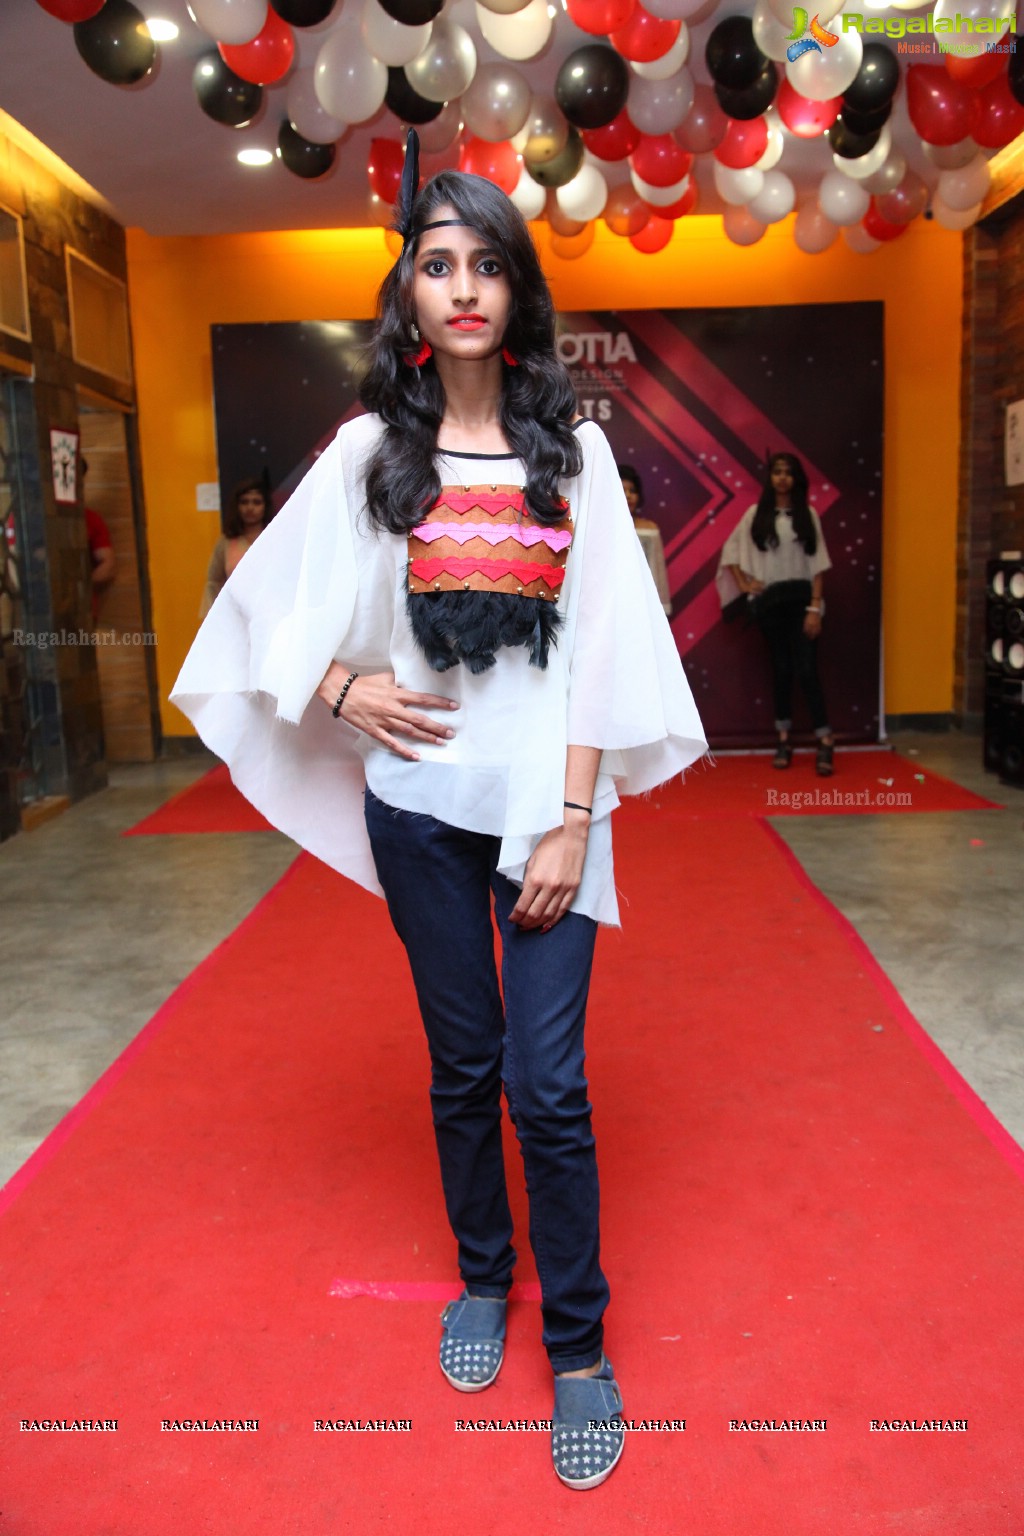 Lakhotia Institute of Design Fresher's Day Celebrations and Fashion Show at LID, Banjara Hills